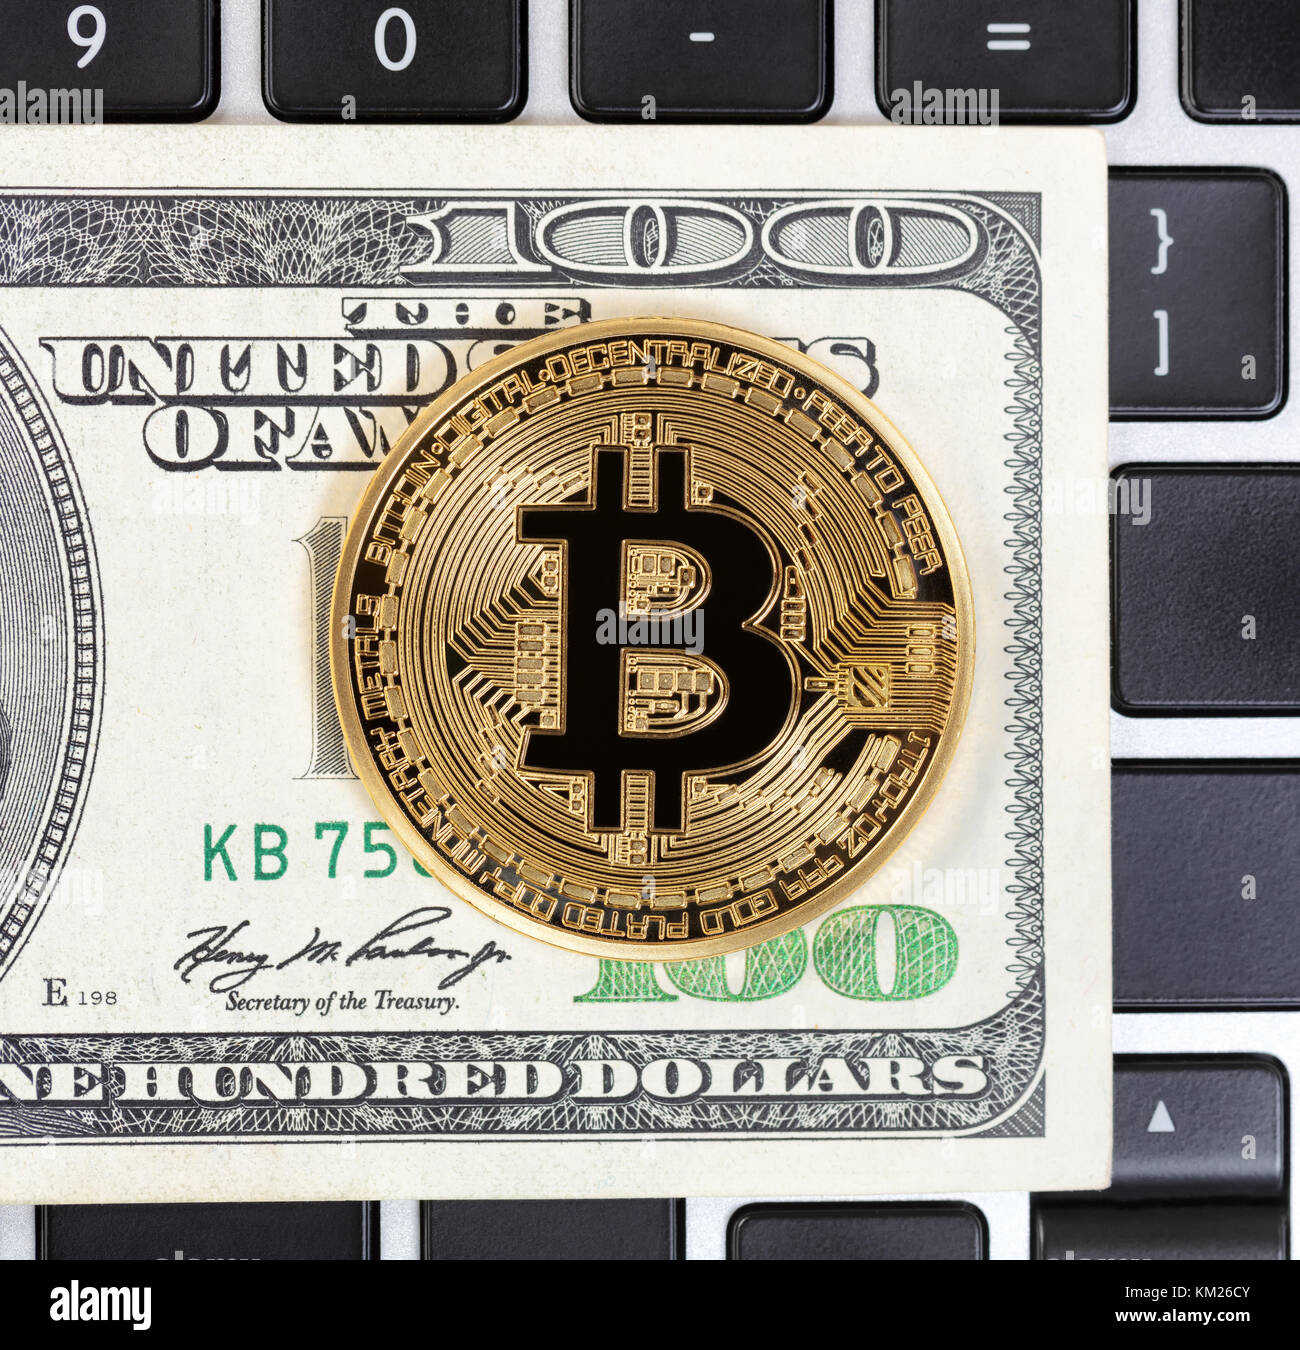 Bitcoin cyber single coin on keyboard with paper currency background Stock Photo